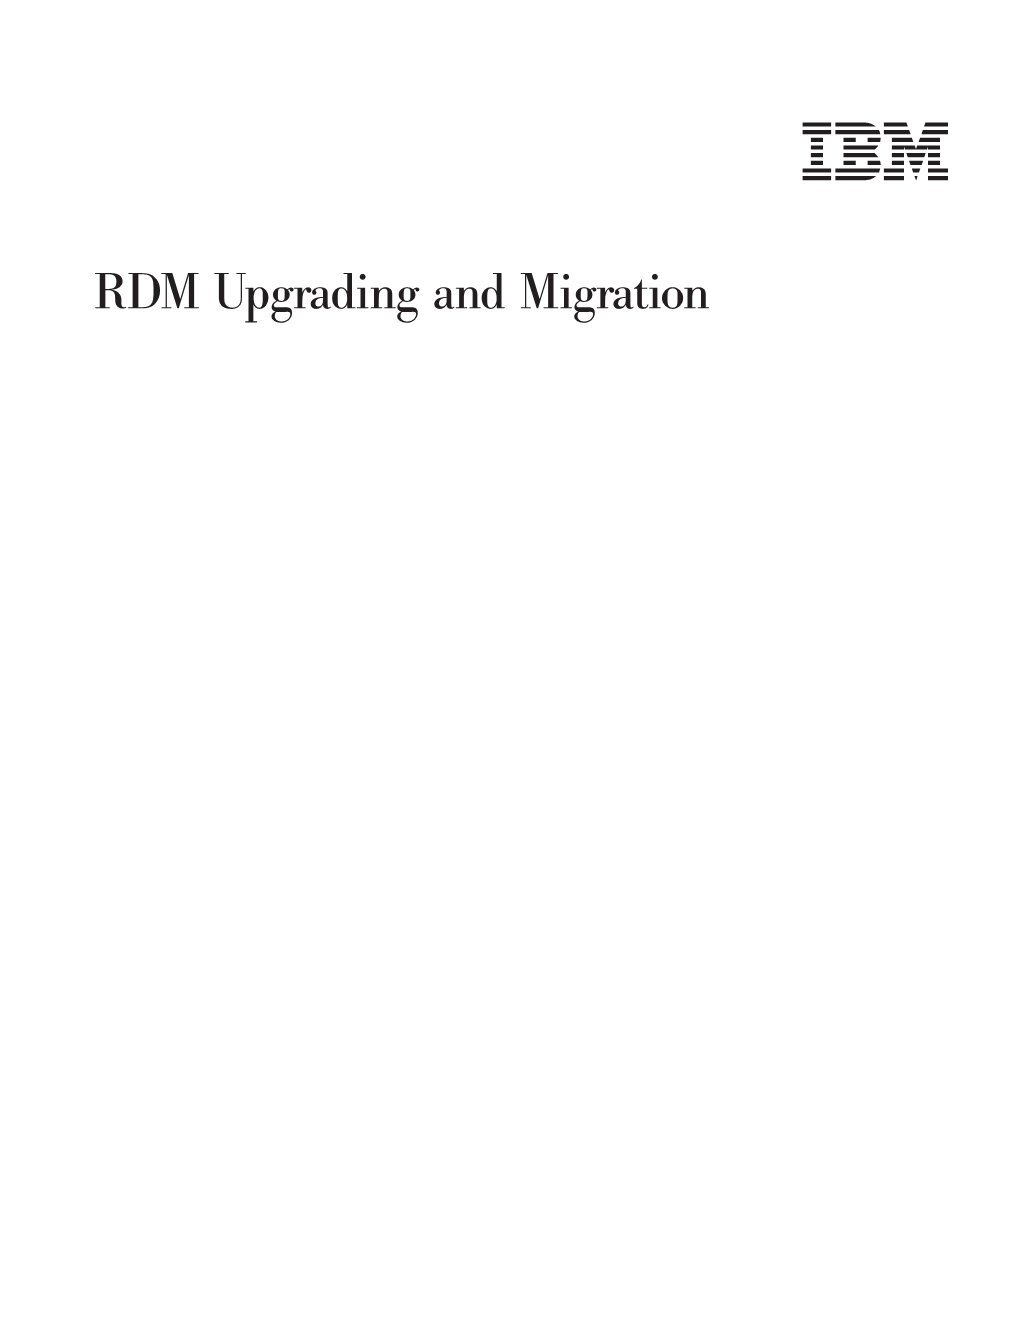 RDM Upgrading and Migration Ii RDM Upgrading and Migration Contents